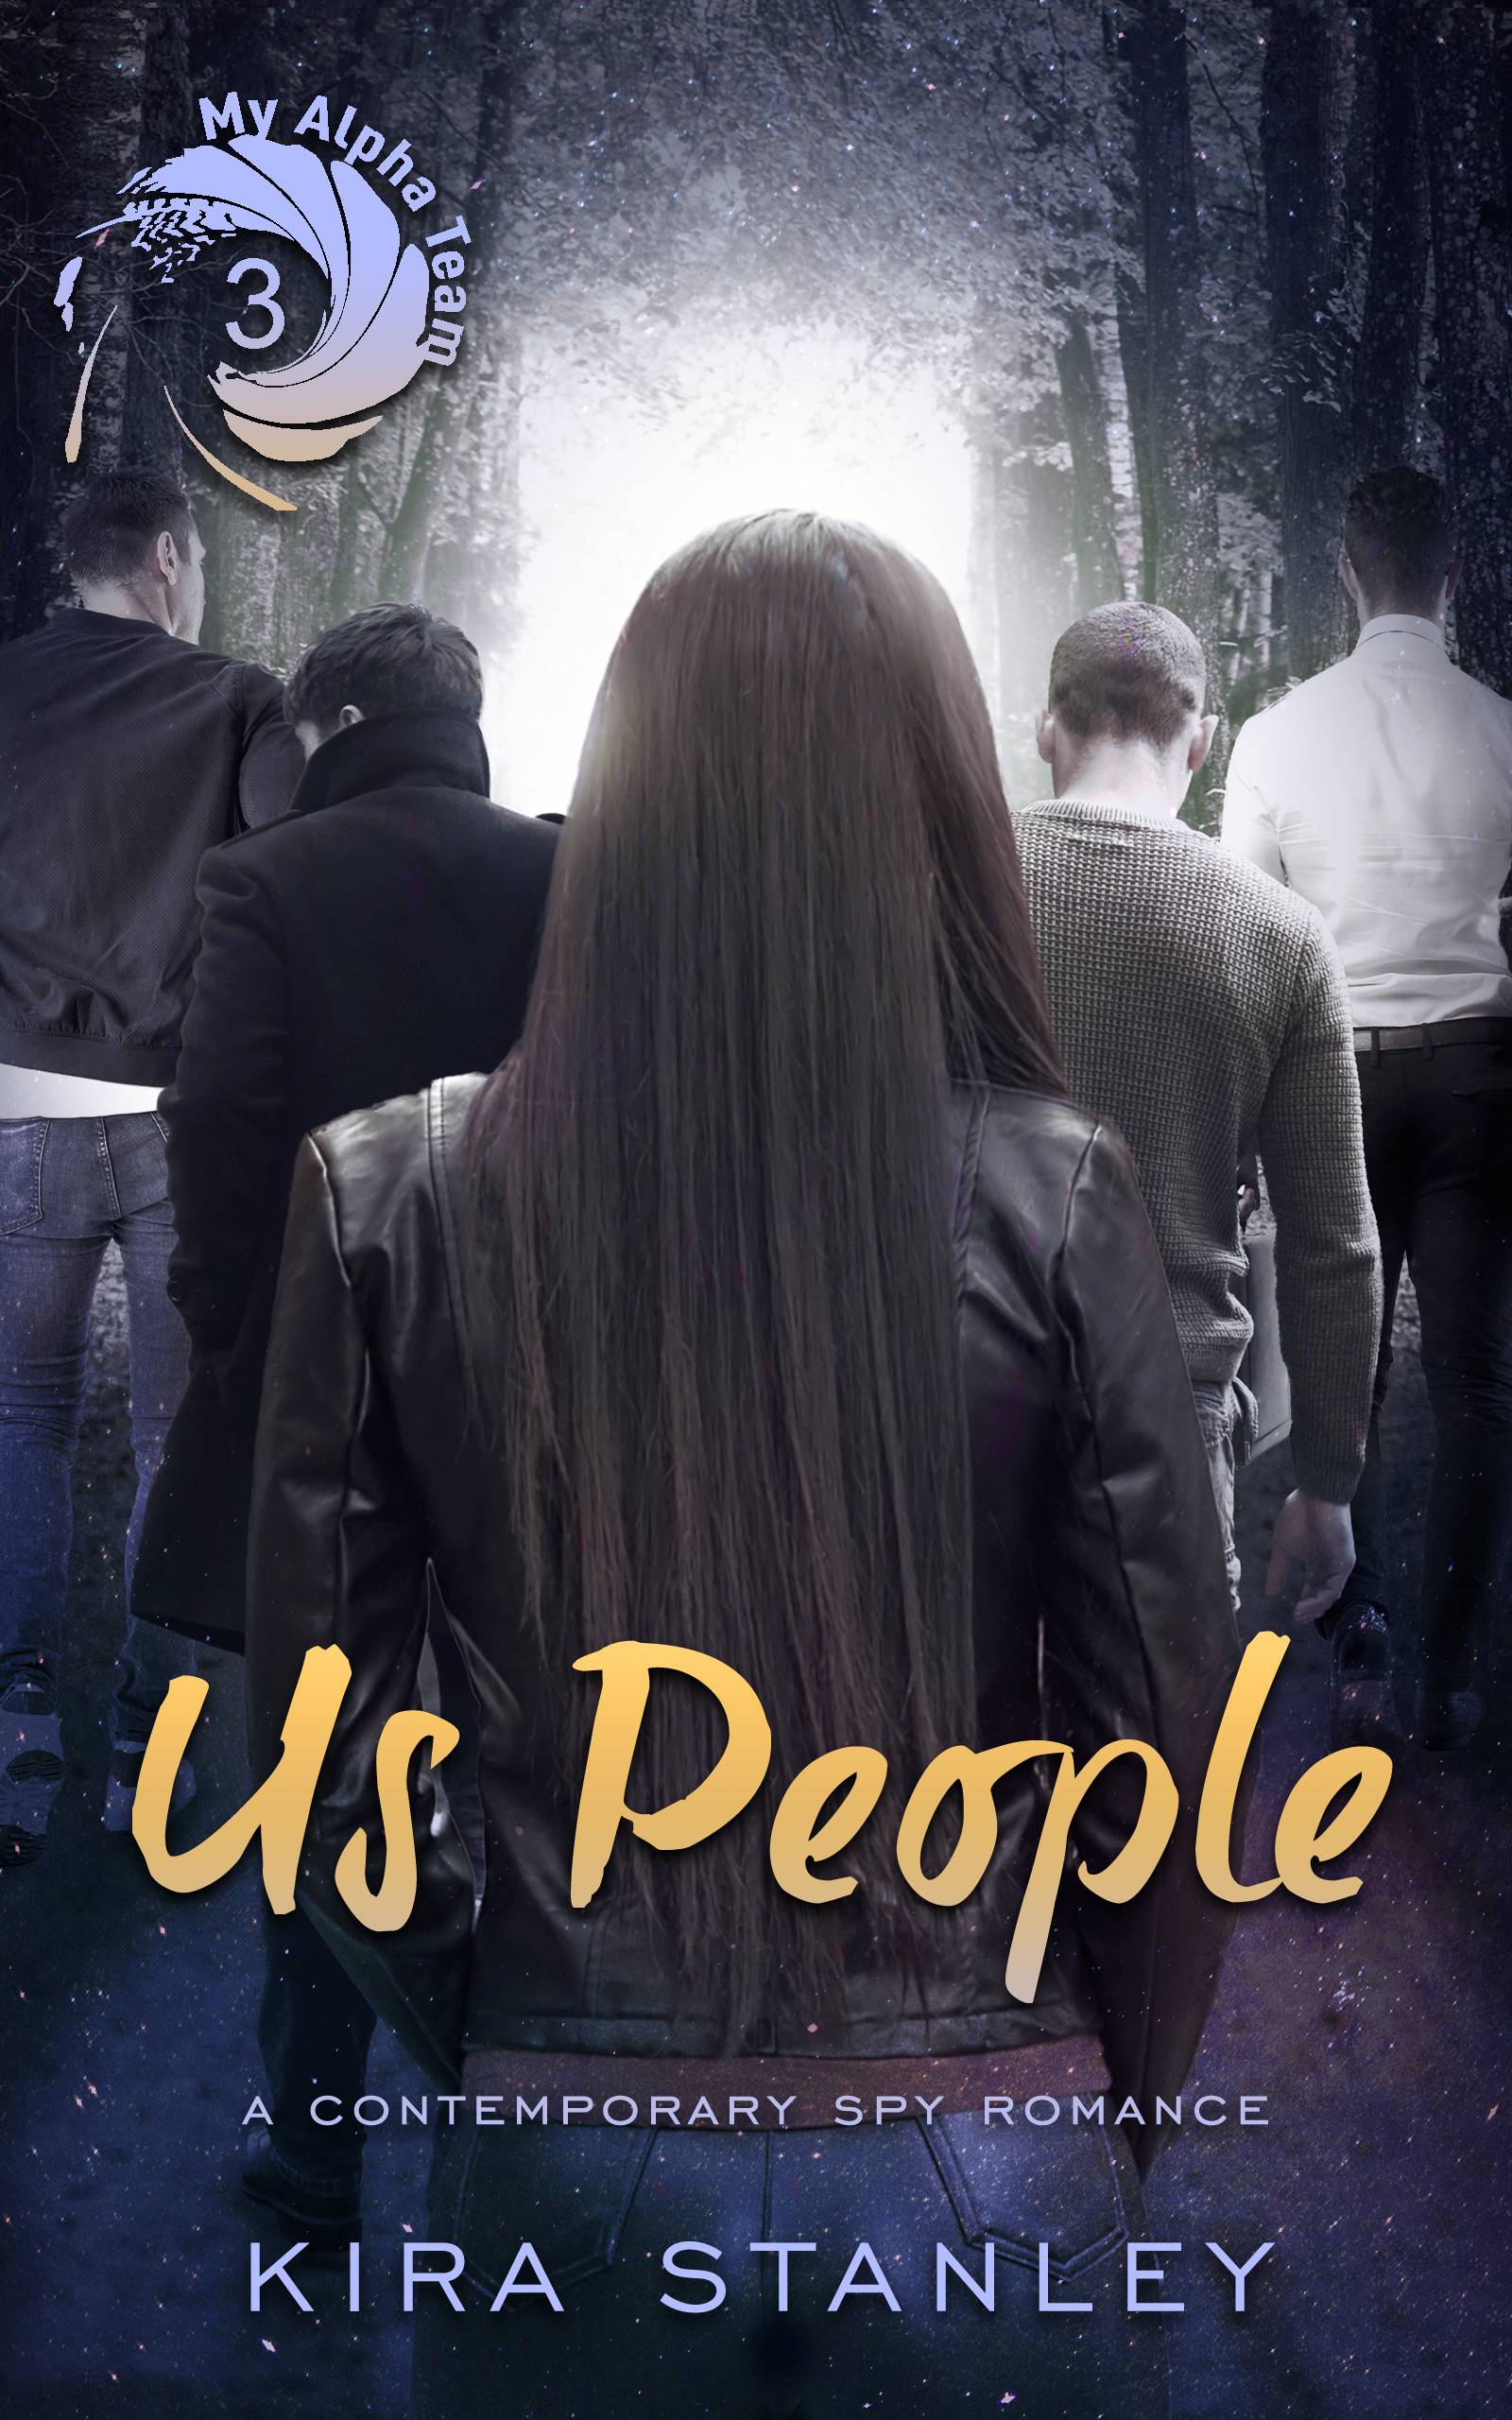 Us People: My Alpha Team #3 Kira Stanley Book Cover